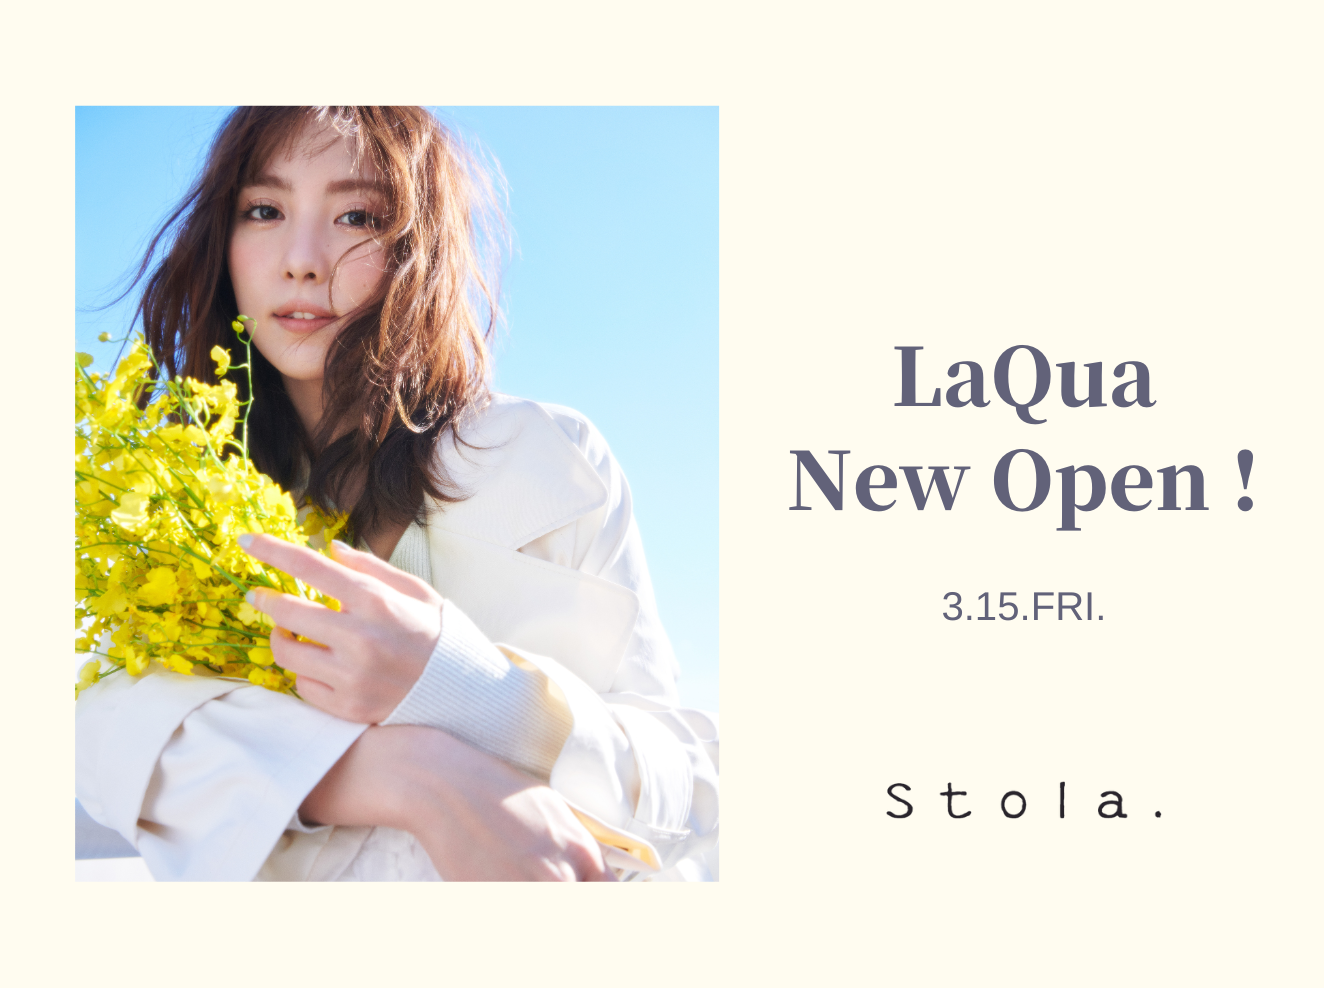 Stola.ラクーア店が3/15(金)にNEW OPEN！